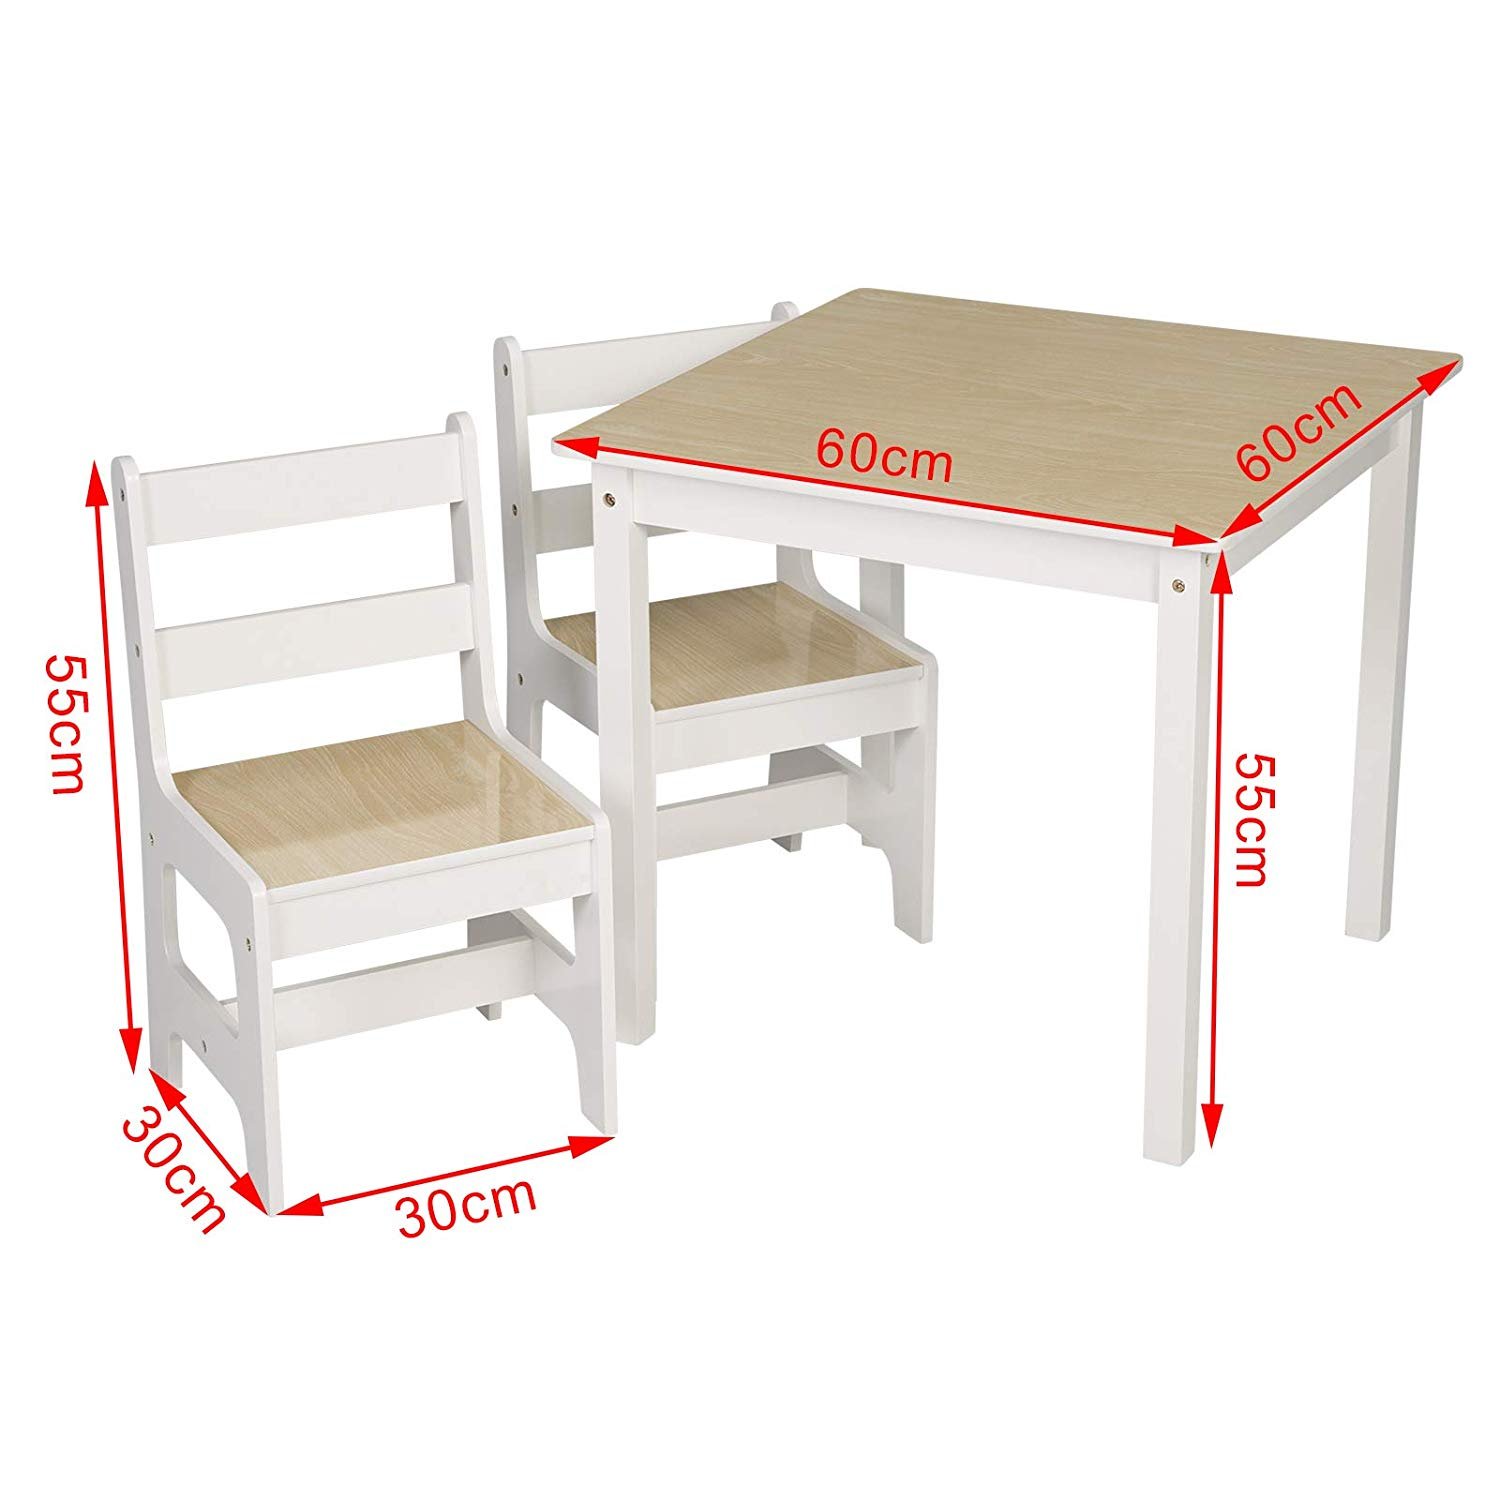 Table maternelle+chaises, table enfant indoor/outdoor, chaises